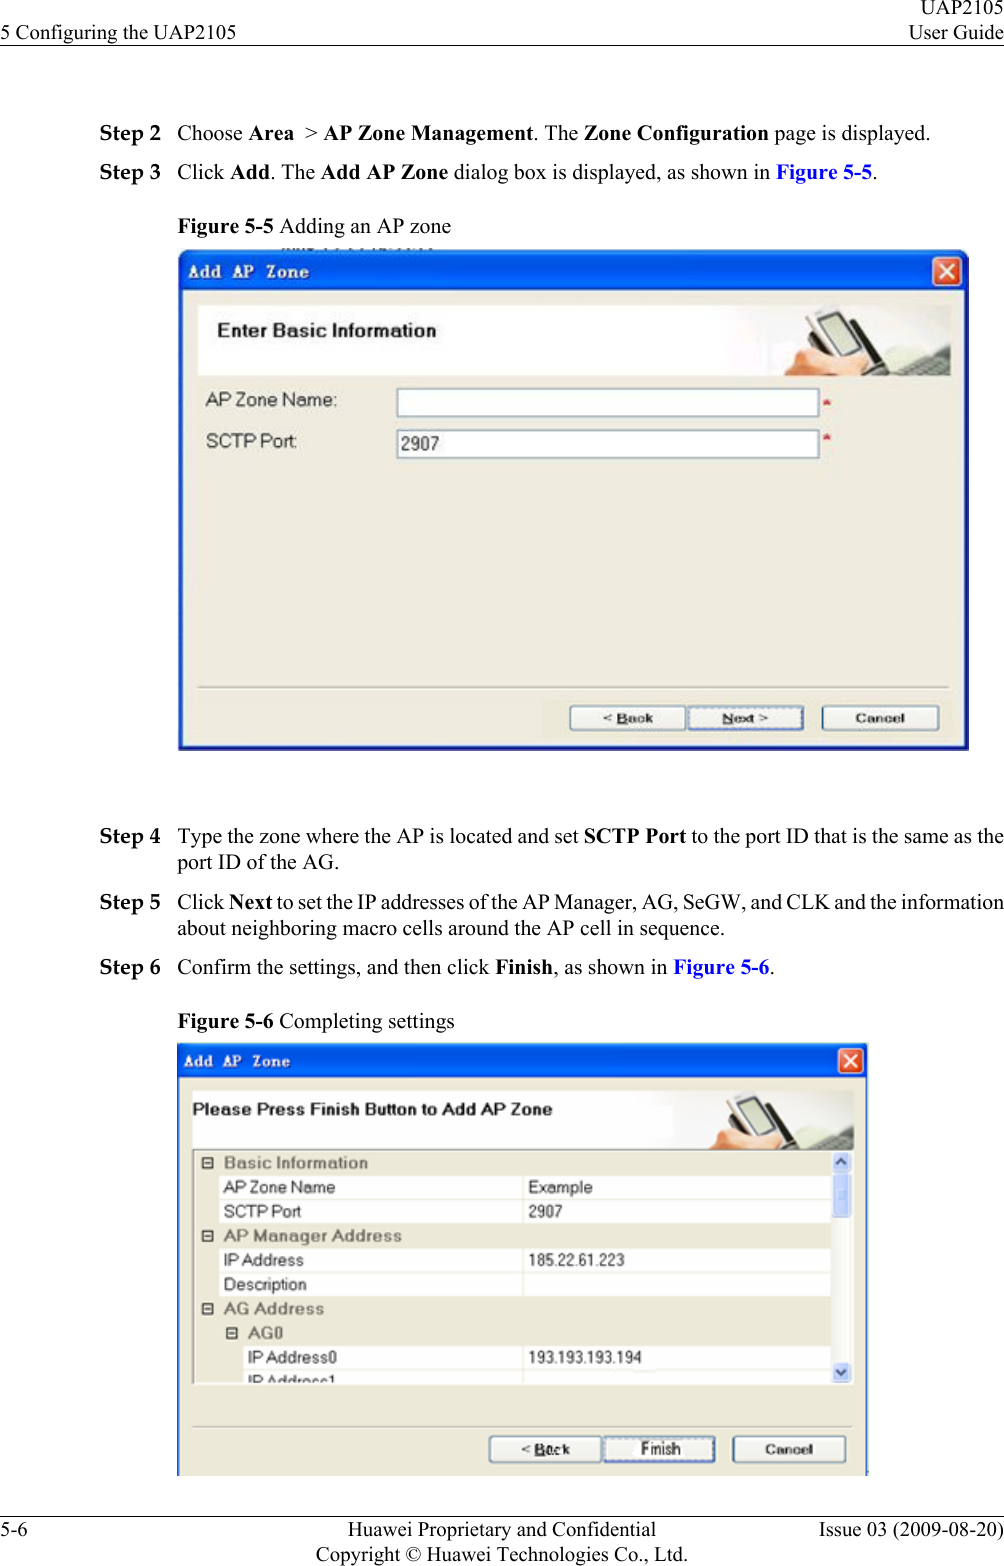  Step 2 Choose Area  &gt; AP Zone Management. The Zone Configuration page is displayed.Step 3 Click Add. The Add AP Zone dialog box is displayed, as shown in Figure 5-5.Figure 5-5 Adding an AP zone Step 4 Type the zone where the AP is located and set SCTP Port to the port ID that is the same as theport ID of the AG.Step 5 Click Next to set the IP addresses of the AP Manager, AG, SeGW, and CLK and the informationabout neighboring macro cells around the AP cell in sequence.Step 6 Confirm the settings, and then click Finish, as shown in Figure 5-6.Figure 5-6 Completing settings5 Configuring the UAP2105UAP2105User Guide5-6 Huawei Proprietary and ConfidentialCopyright © Huawei Technologies Co., Ltd.Issue 03 (2009-08-20)